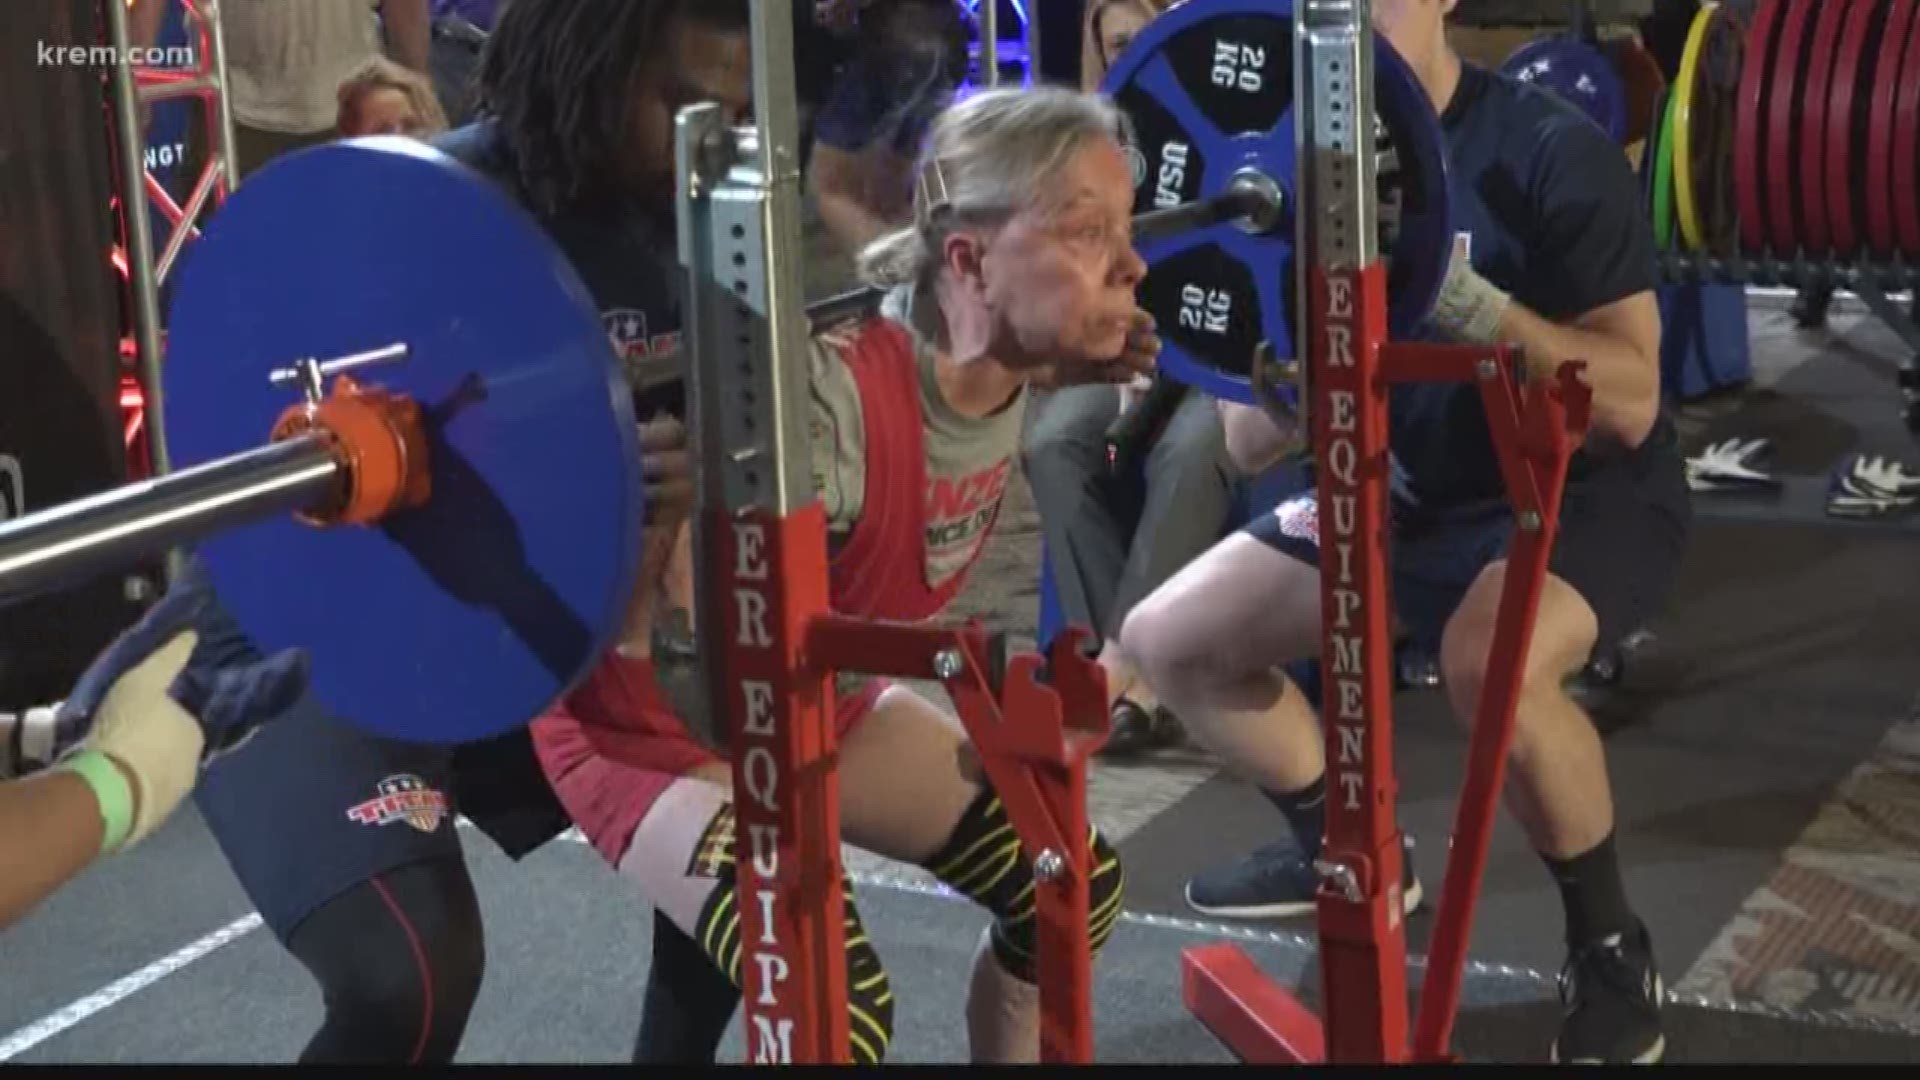 Women of all ages were in Spokane competing in the USA Powerlifting National championship.